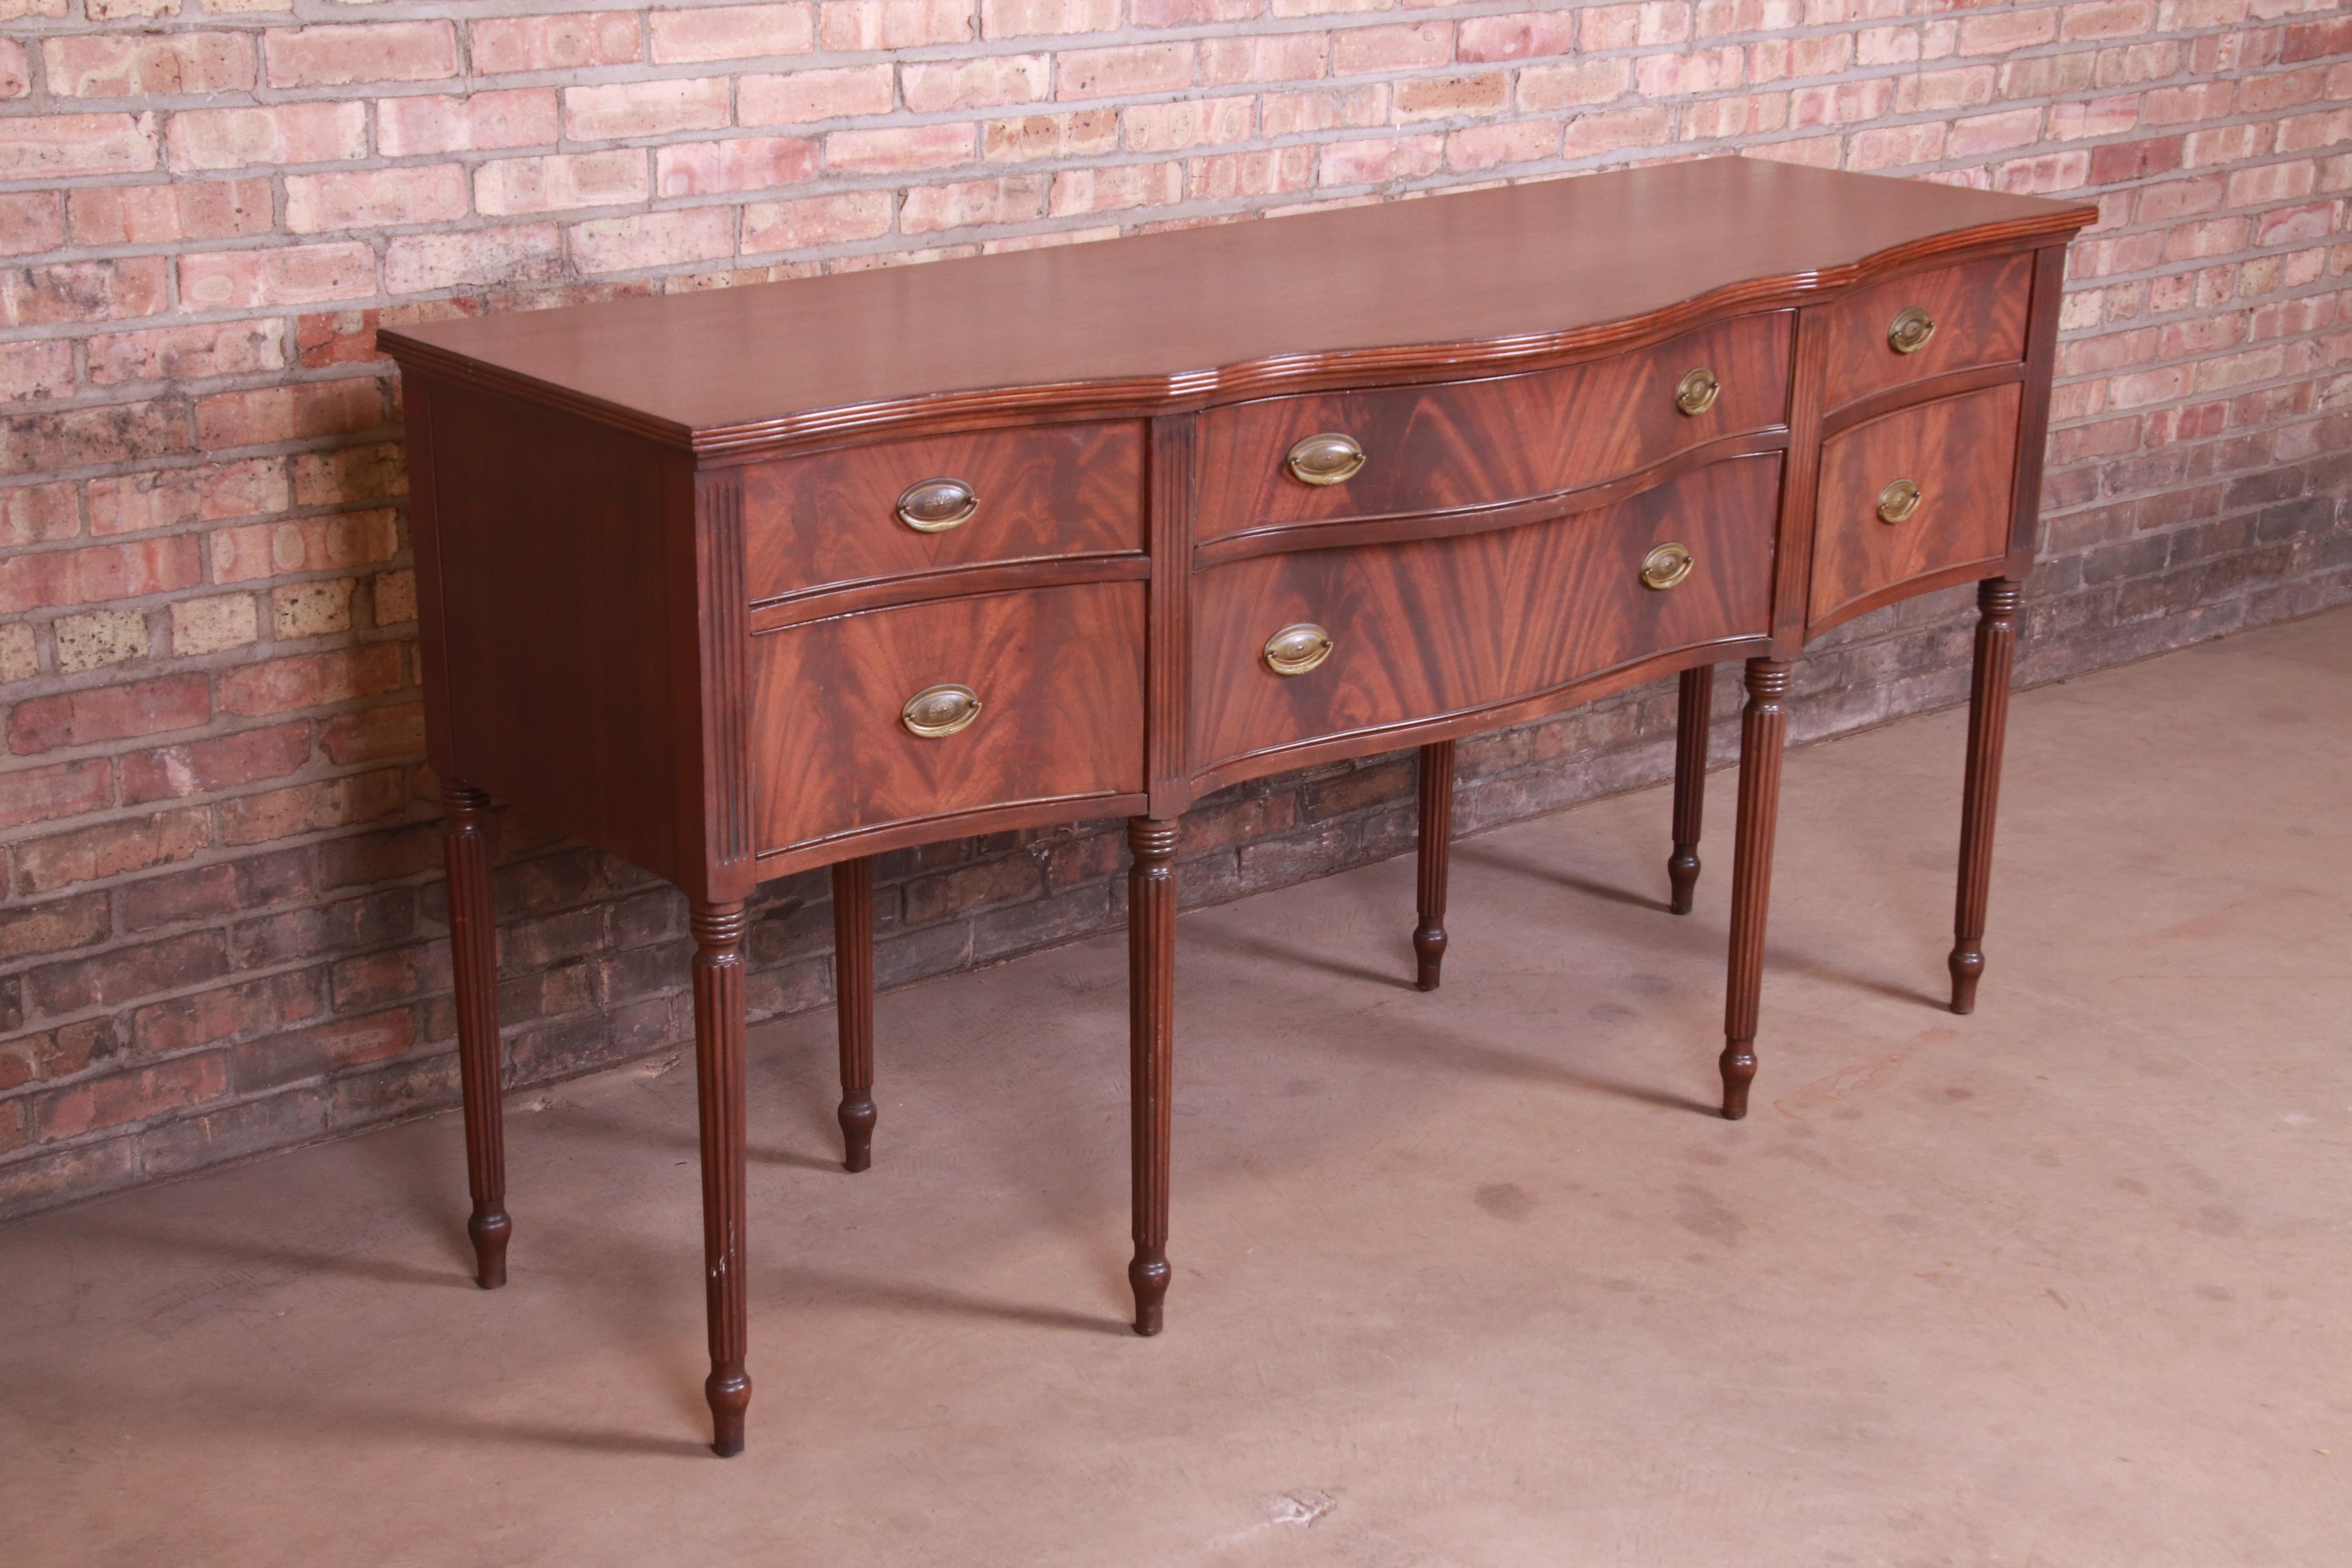 Early 20th Century Early Baker Furniture Flame Mahogany Hepplewhite Sideboard Credenza, circa 1920s